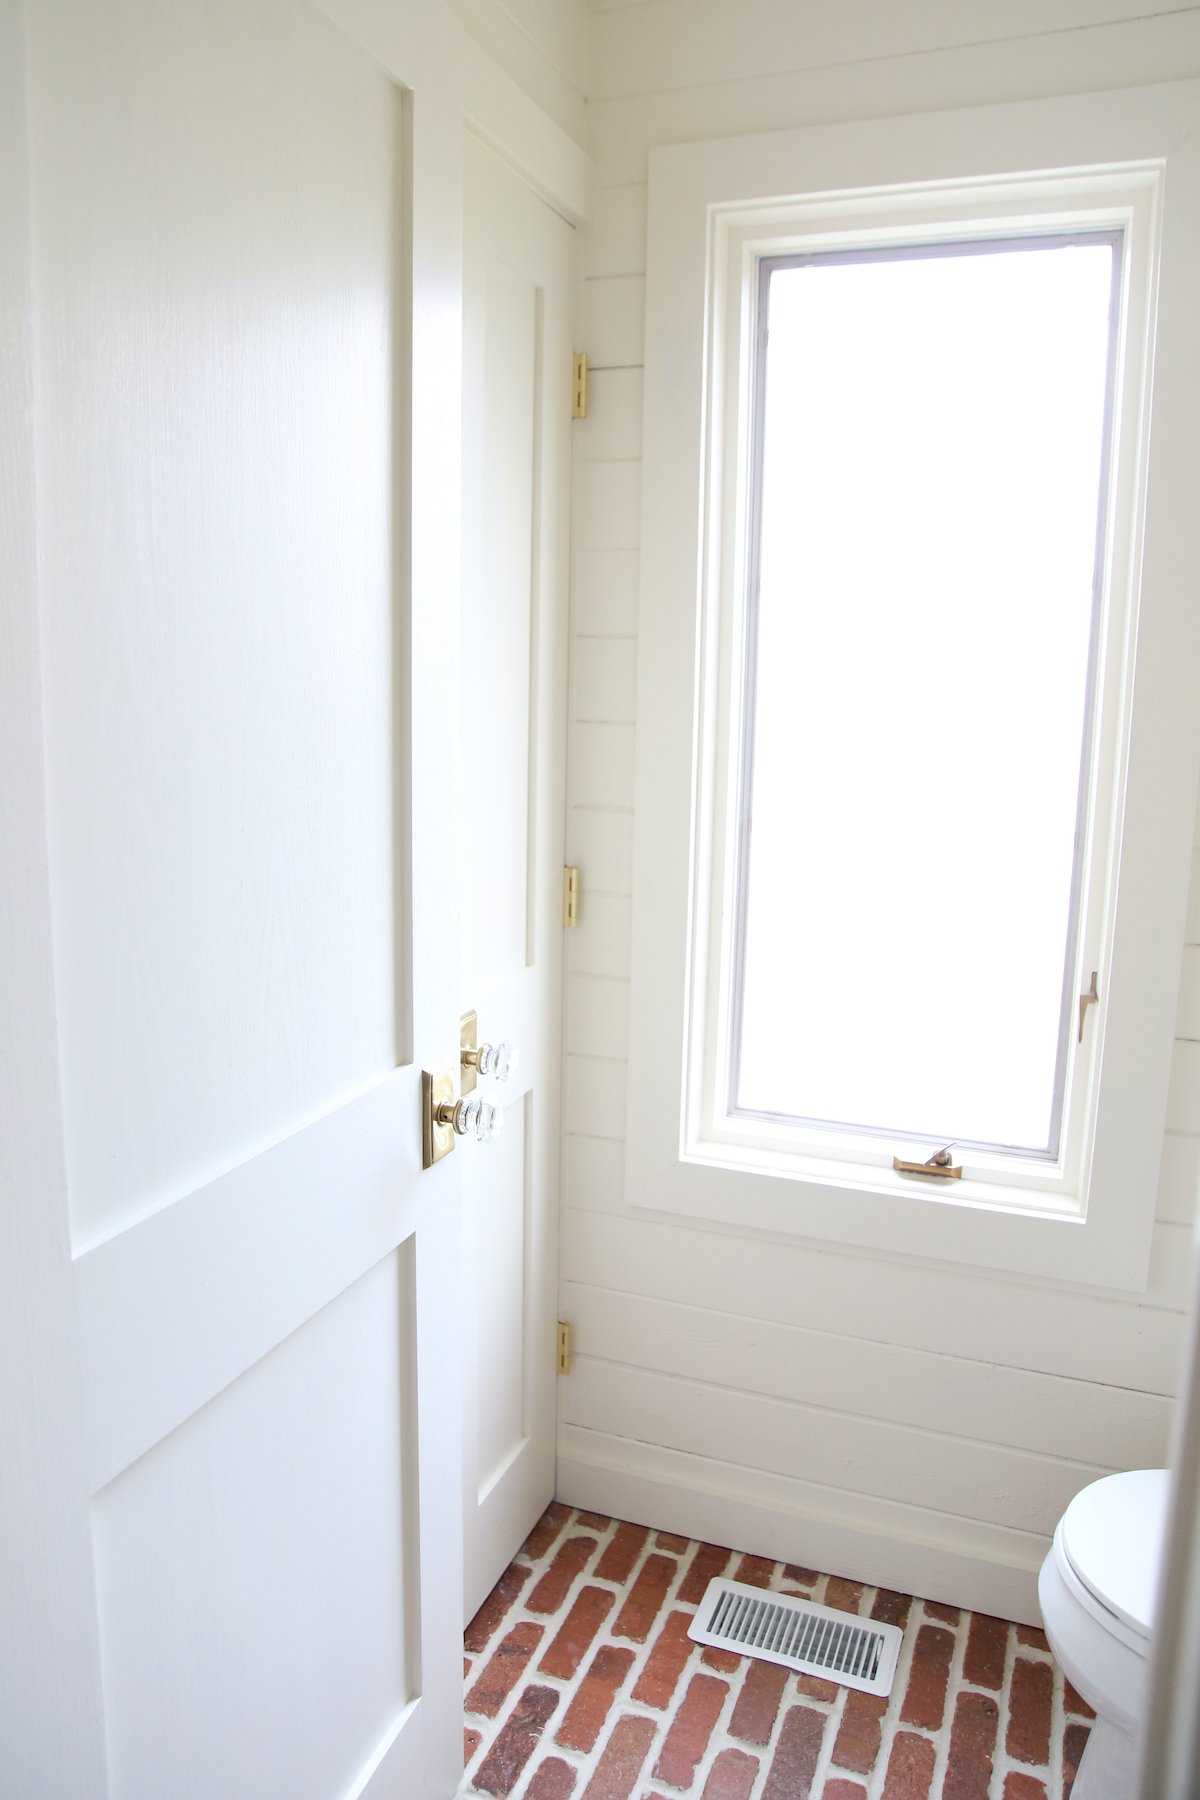 A bathroom painted in Benjamin Moore Navajo White, with a toilet and a window.